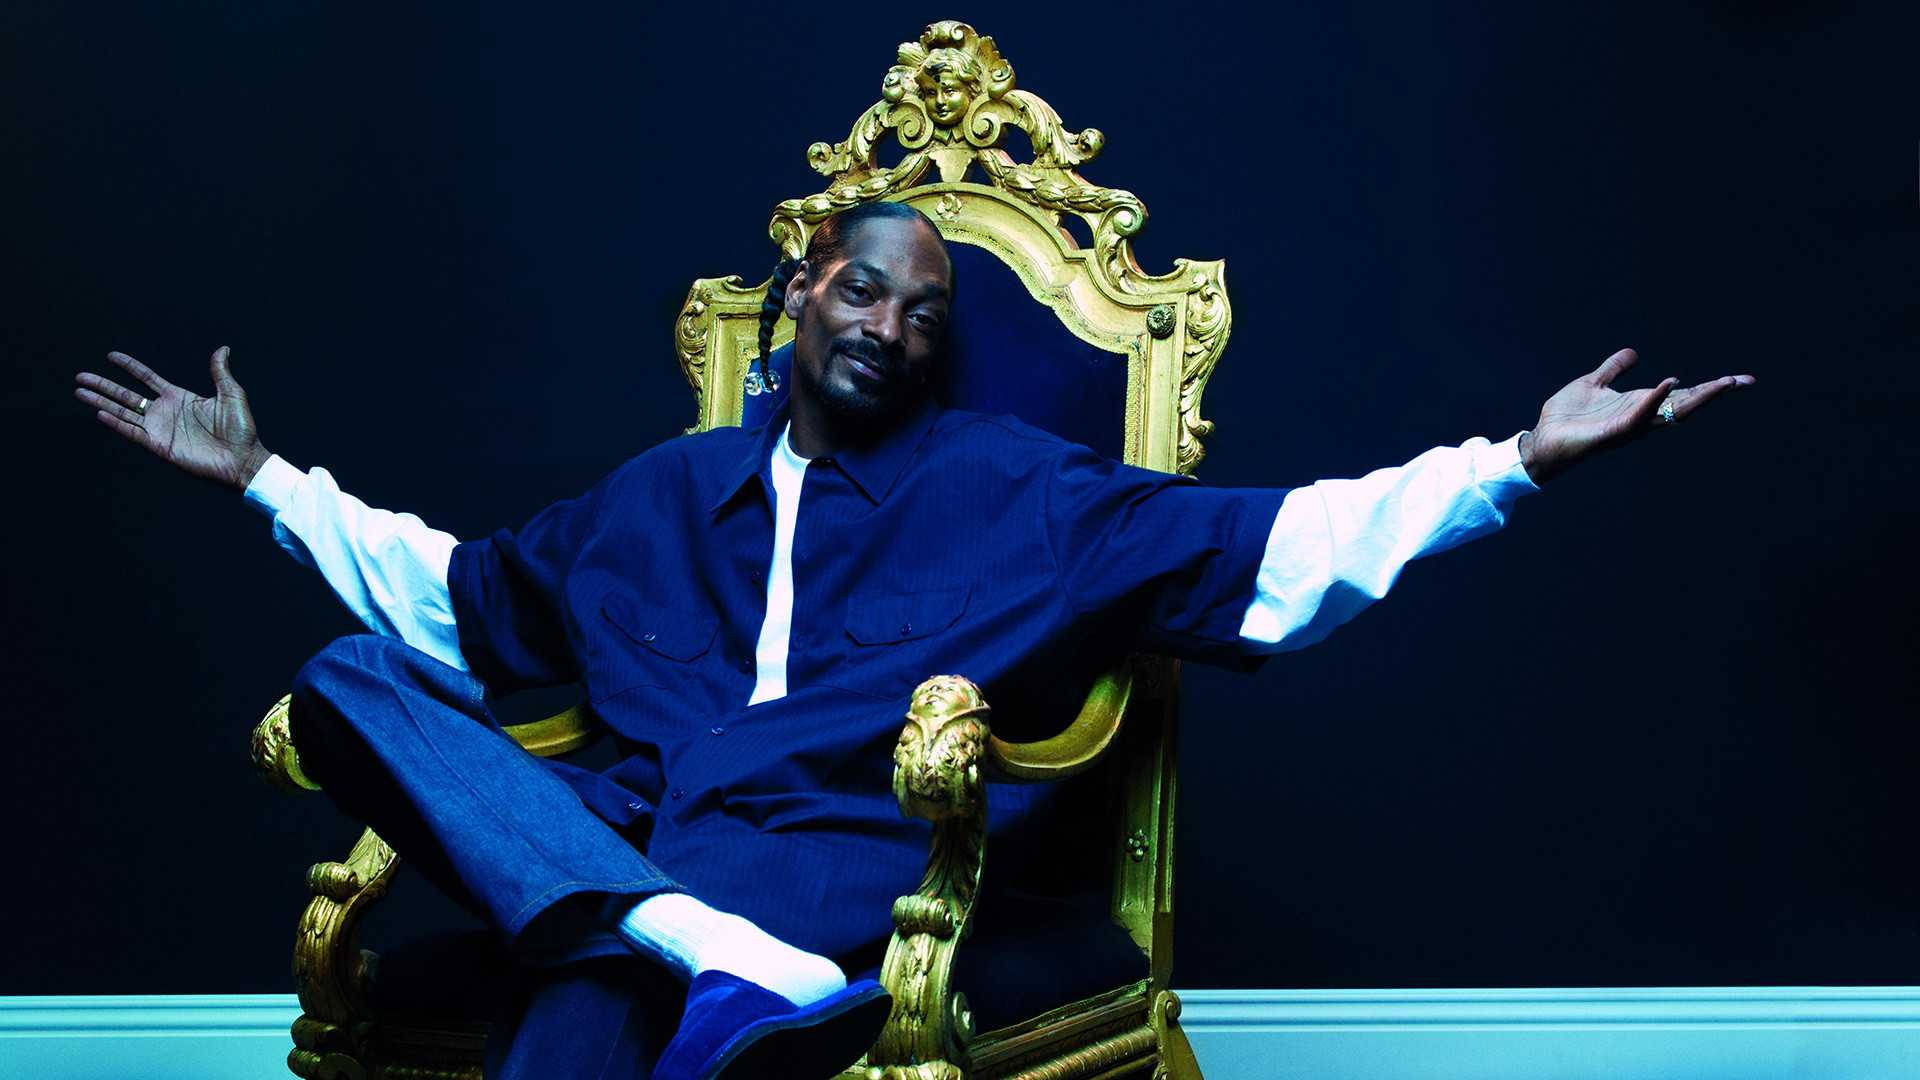 Snoop Dogg On A Throne Background